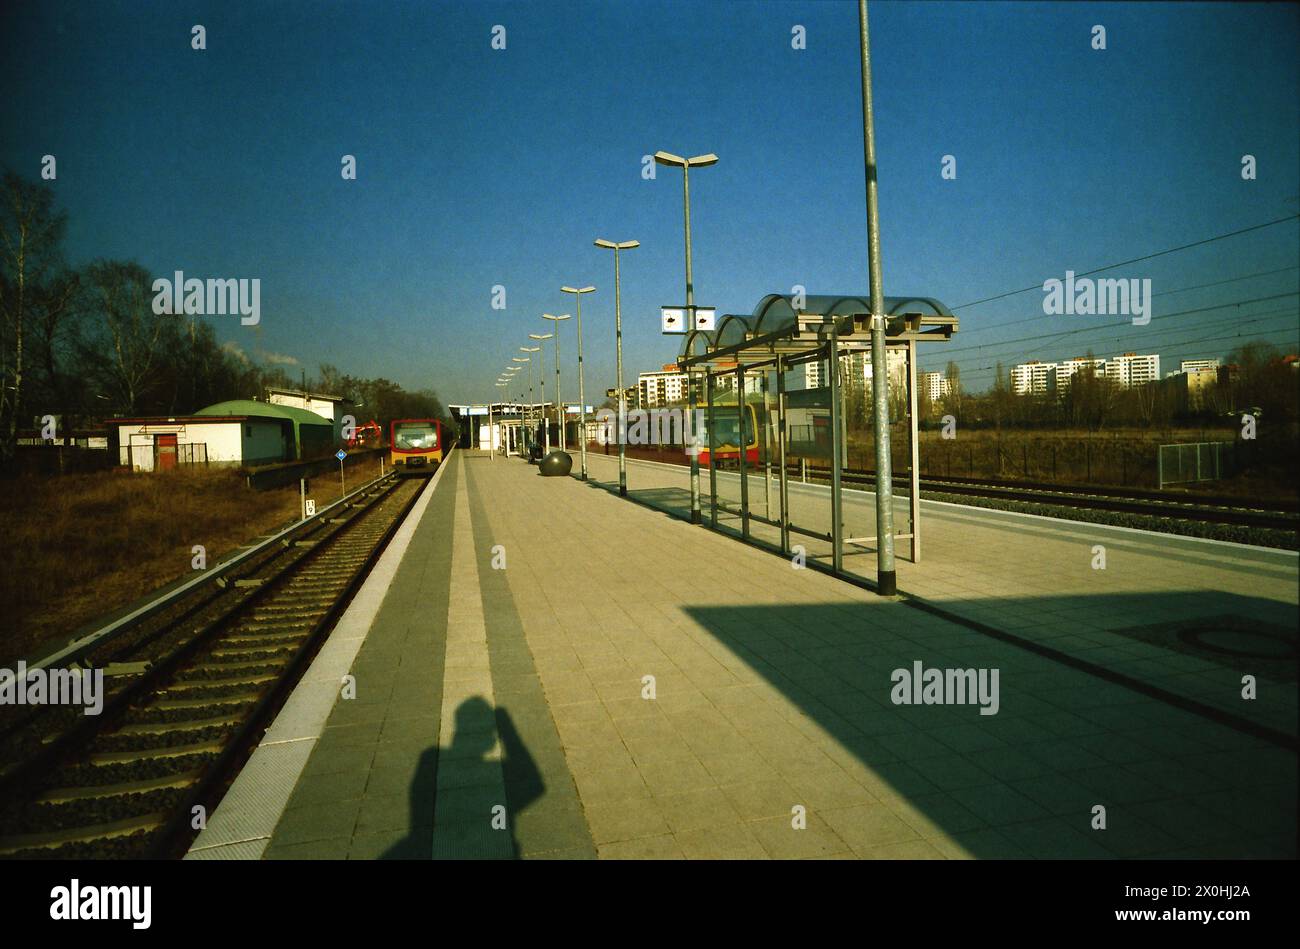 on 24.2.2005 the line was extended beyond Lichterfelde Süd to Teltow Stadt [automated translation] Stock Photo